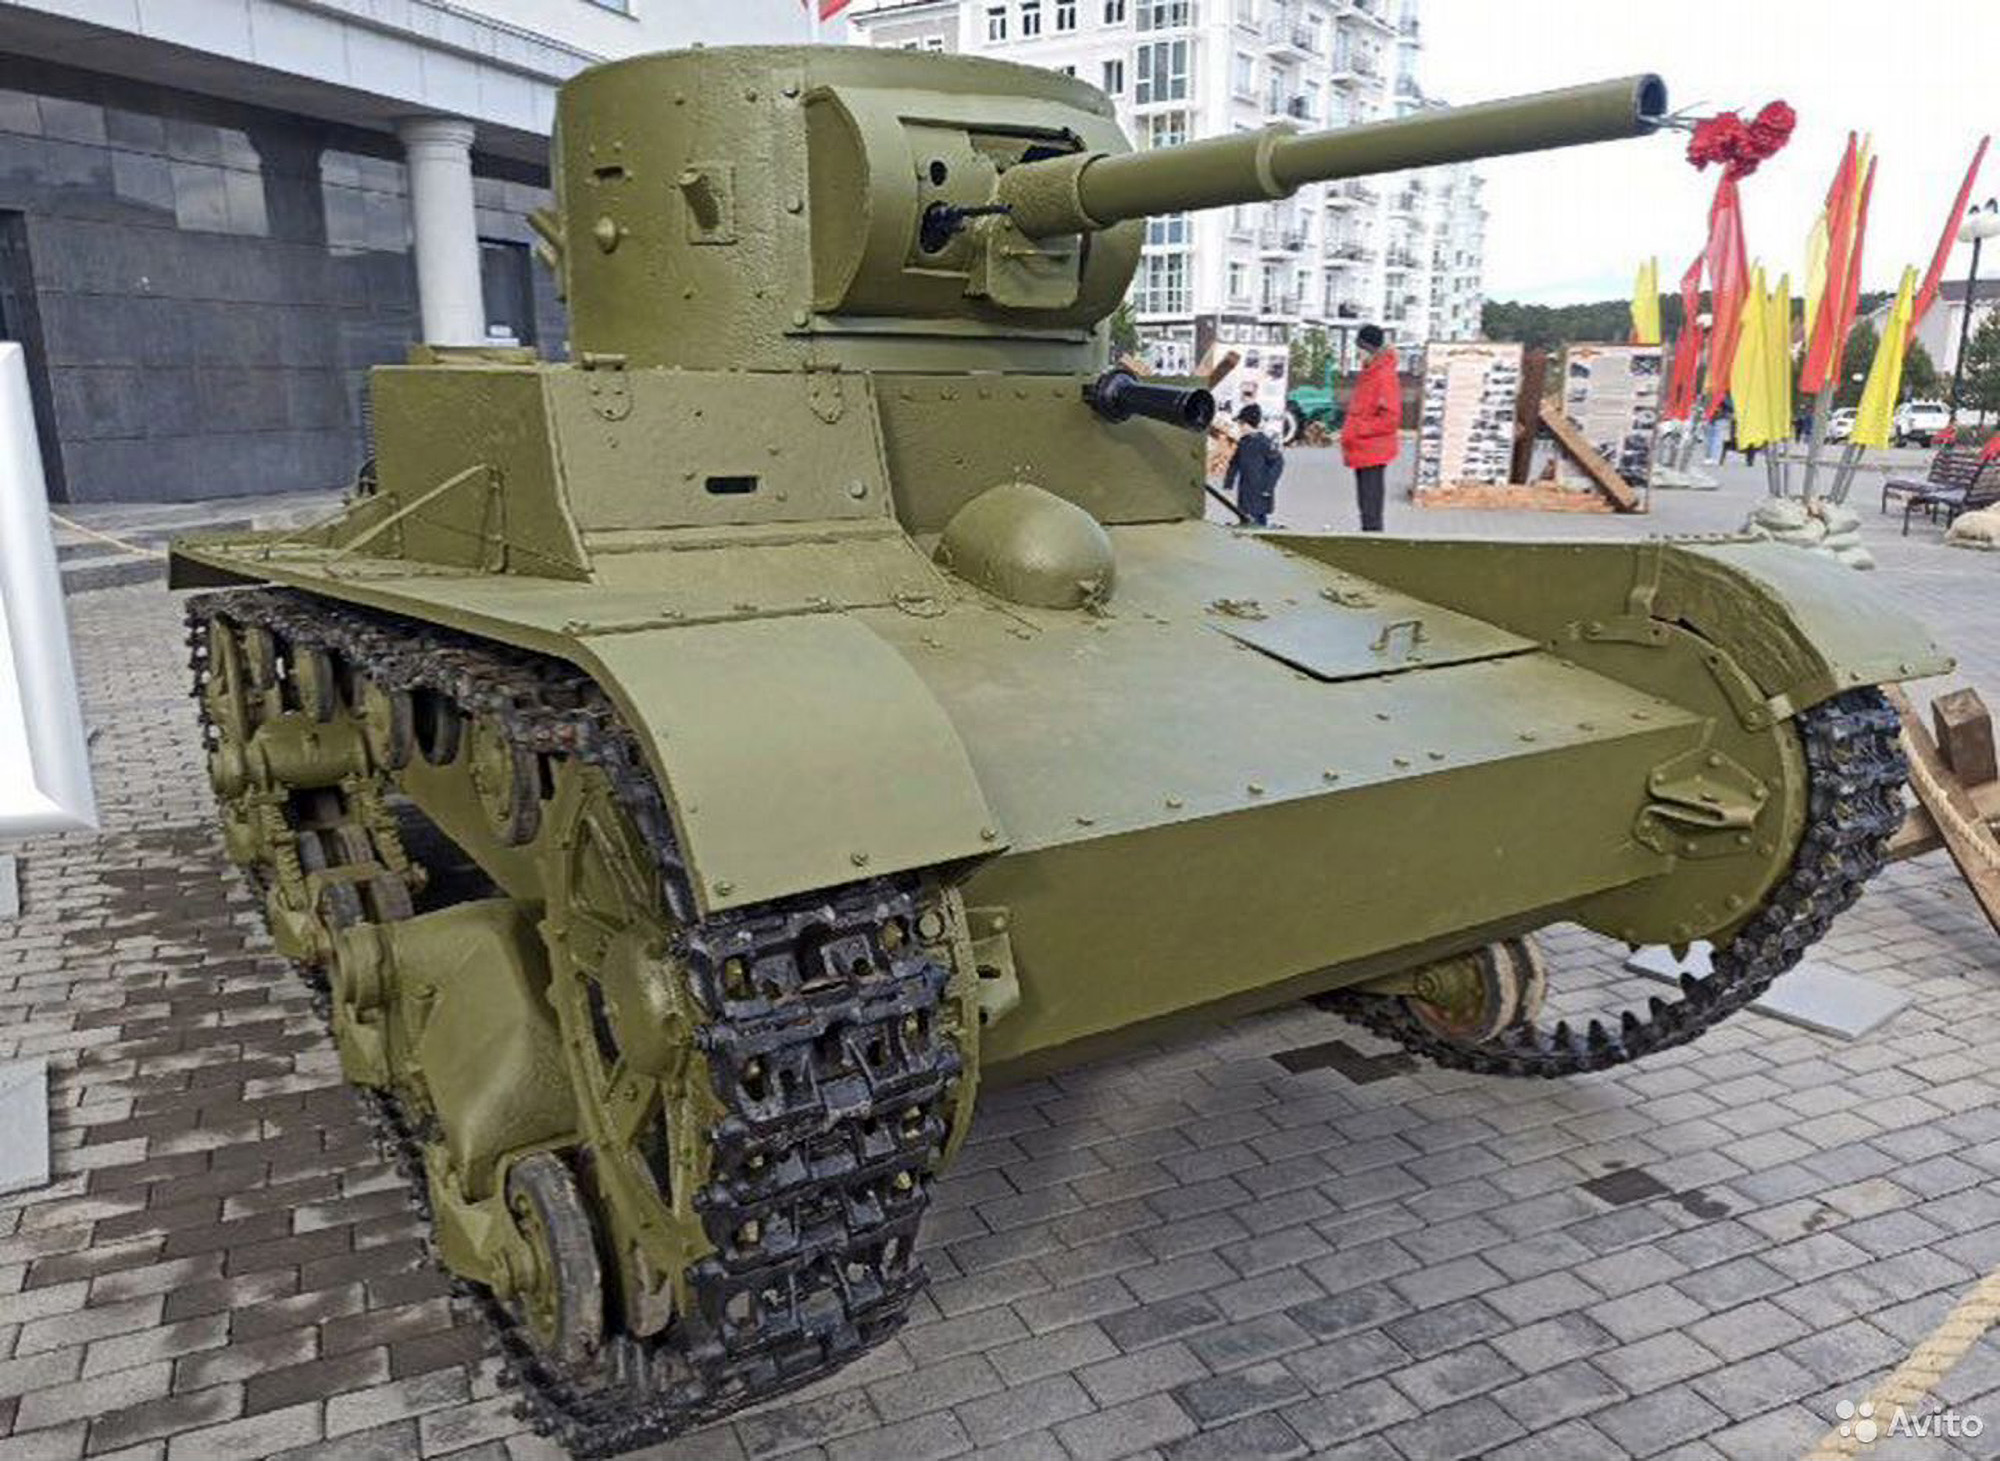 Read more about the article Restored Soviet WWII Tank Goes On Sale For GBP 60K